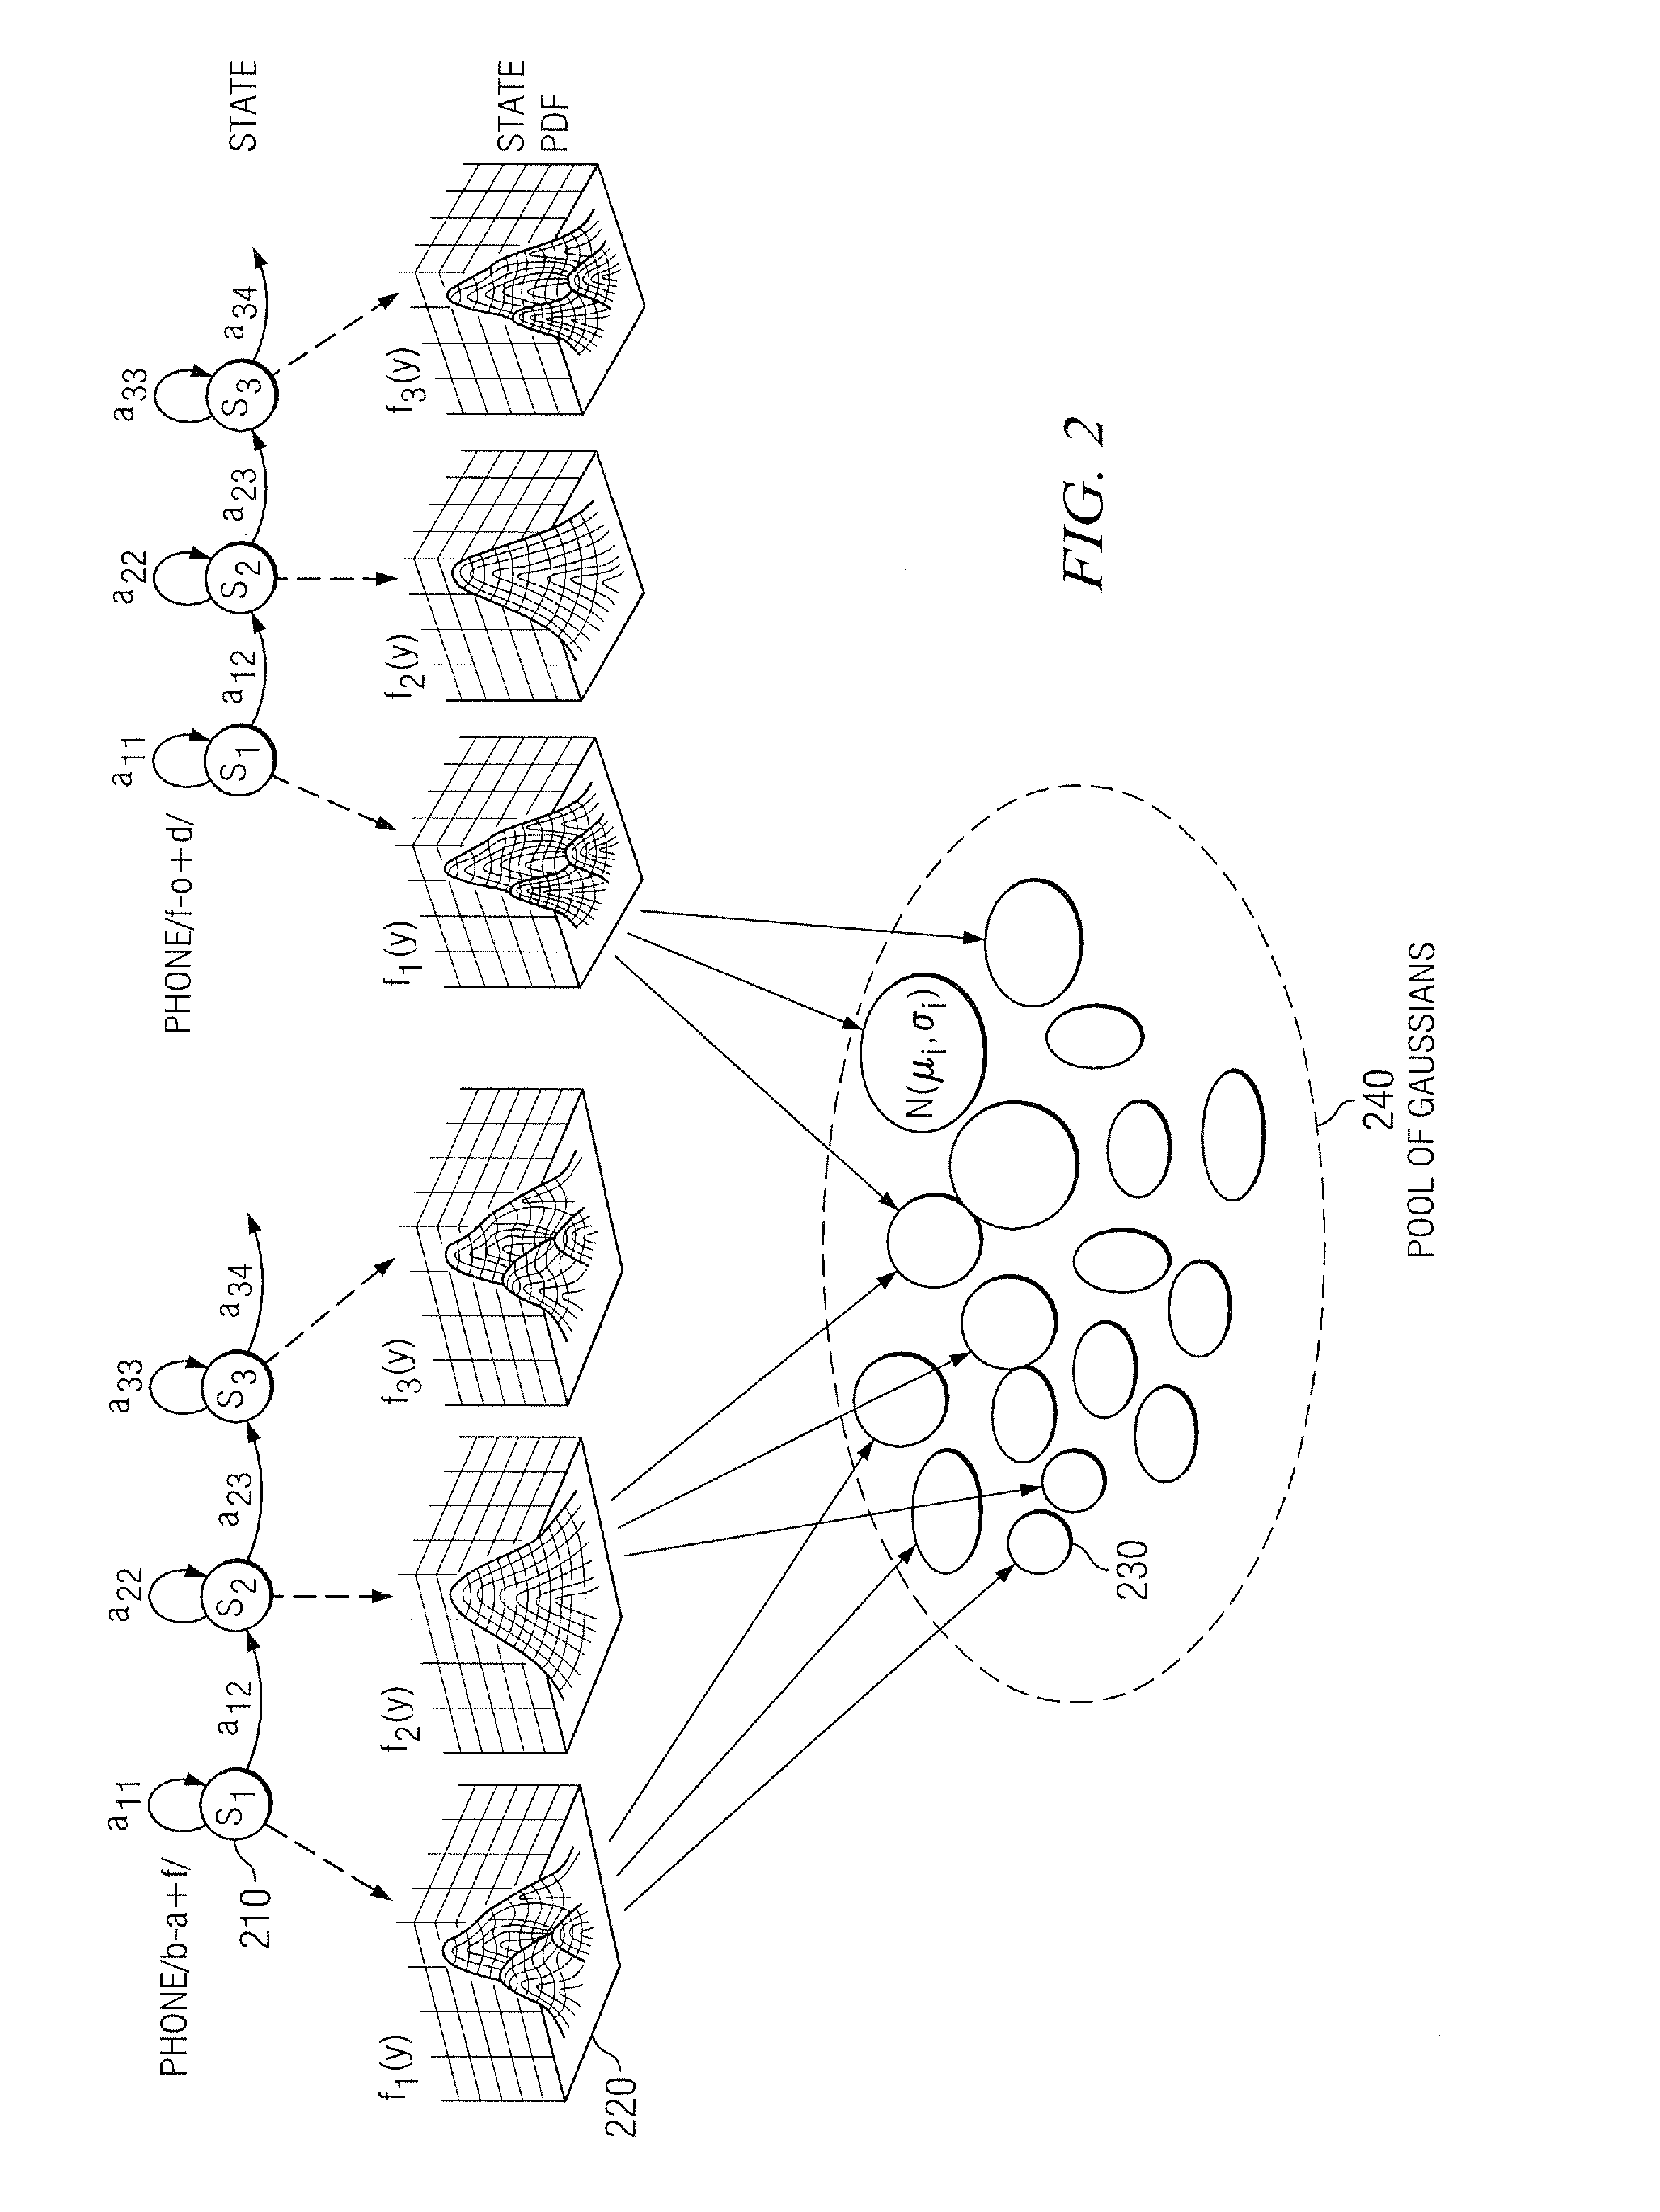 System and method for generating heterogeneously tied gaussian mixture models for automatic speech recognition acoustic models